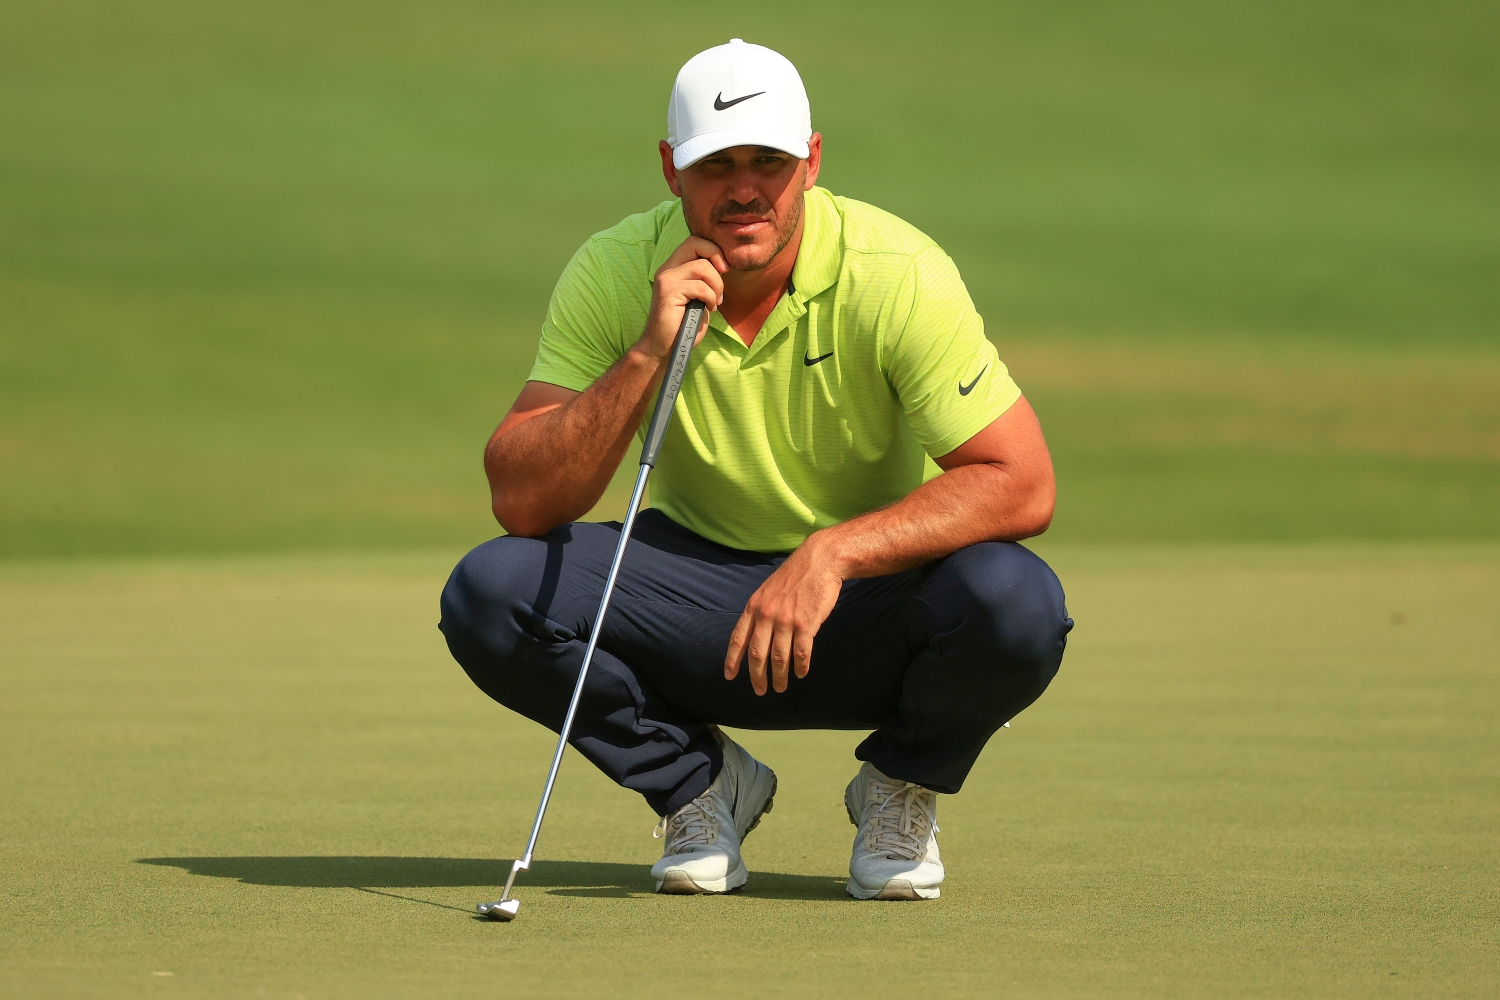 Brooks Koepka lines up a putt during the World Golf Championships-Workday Championship at The Concession.